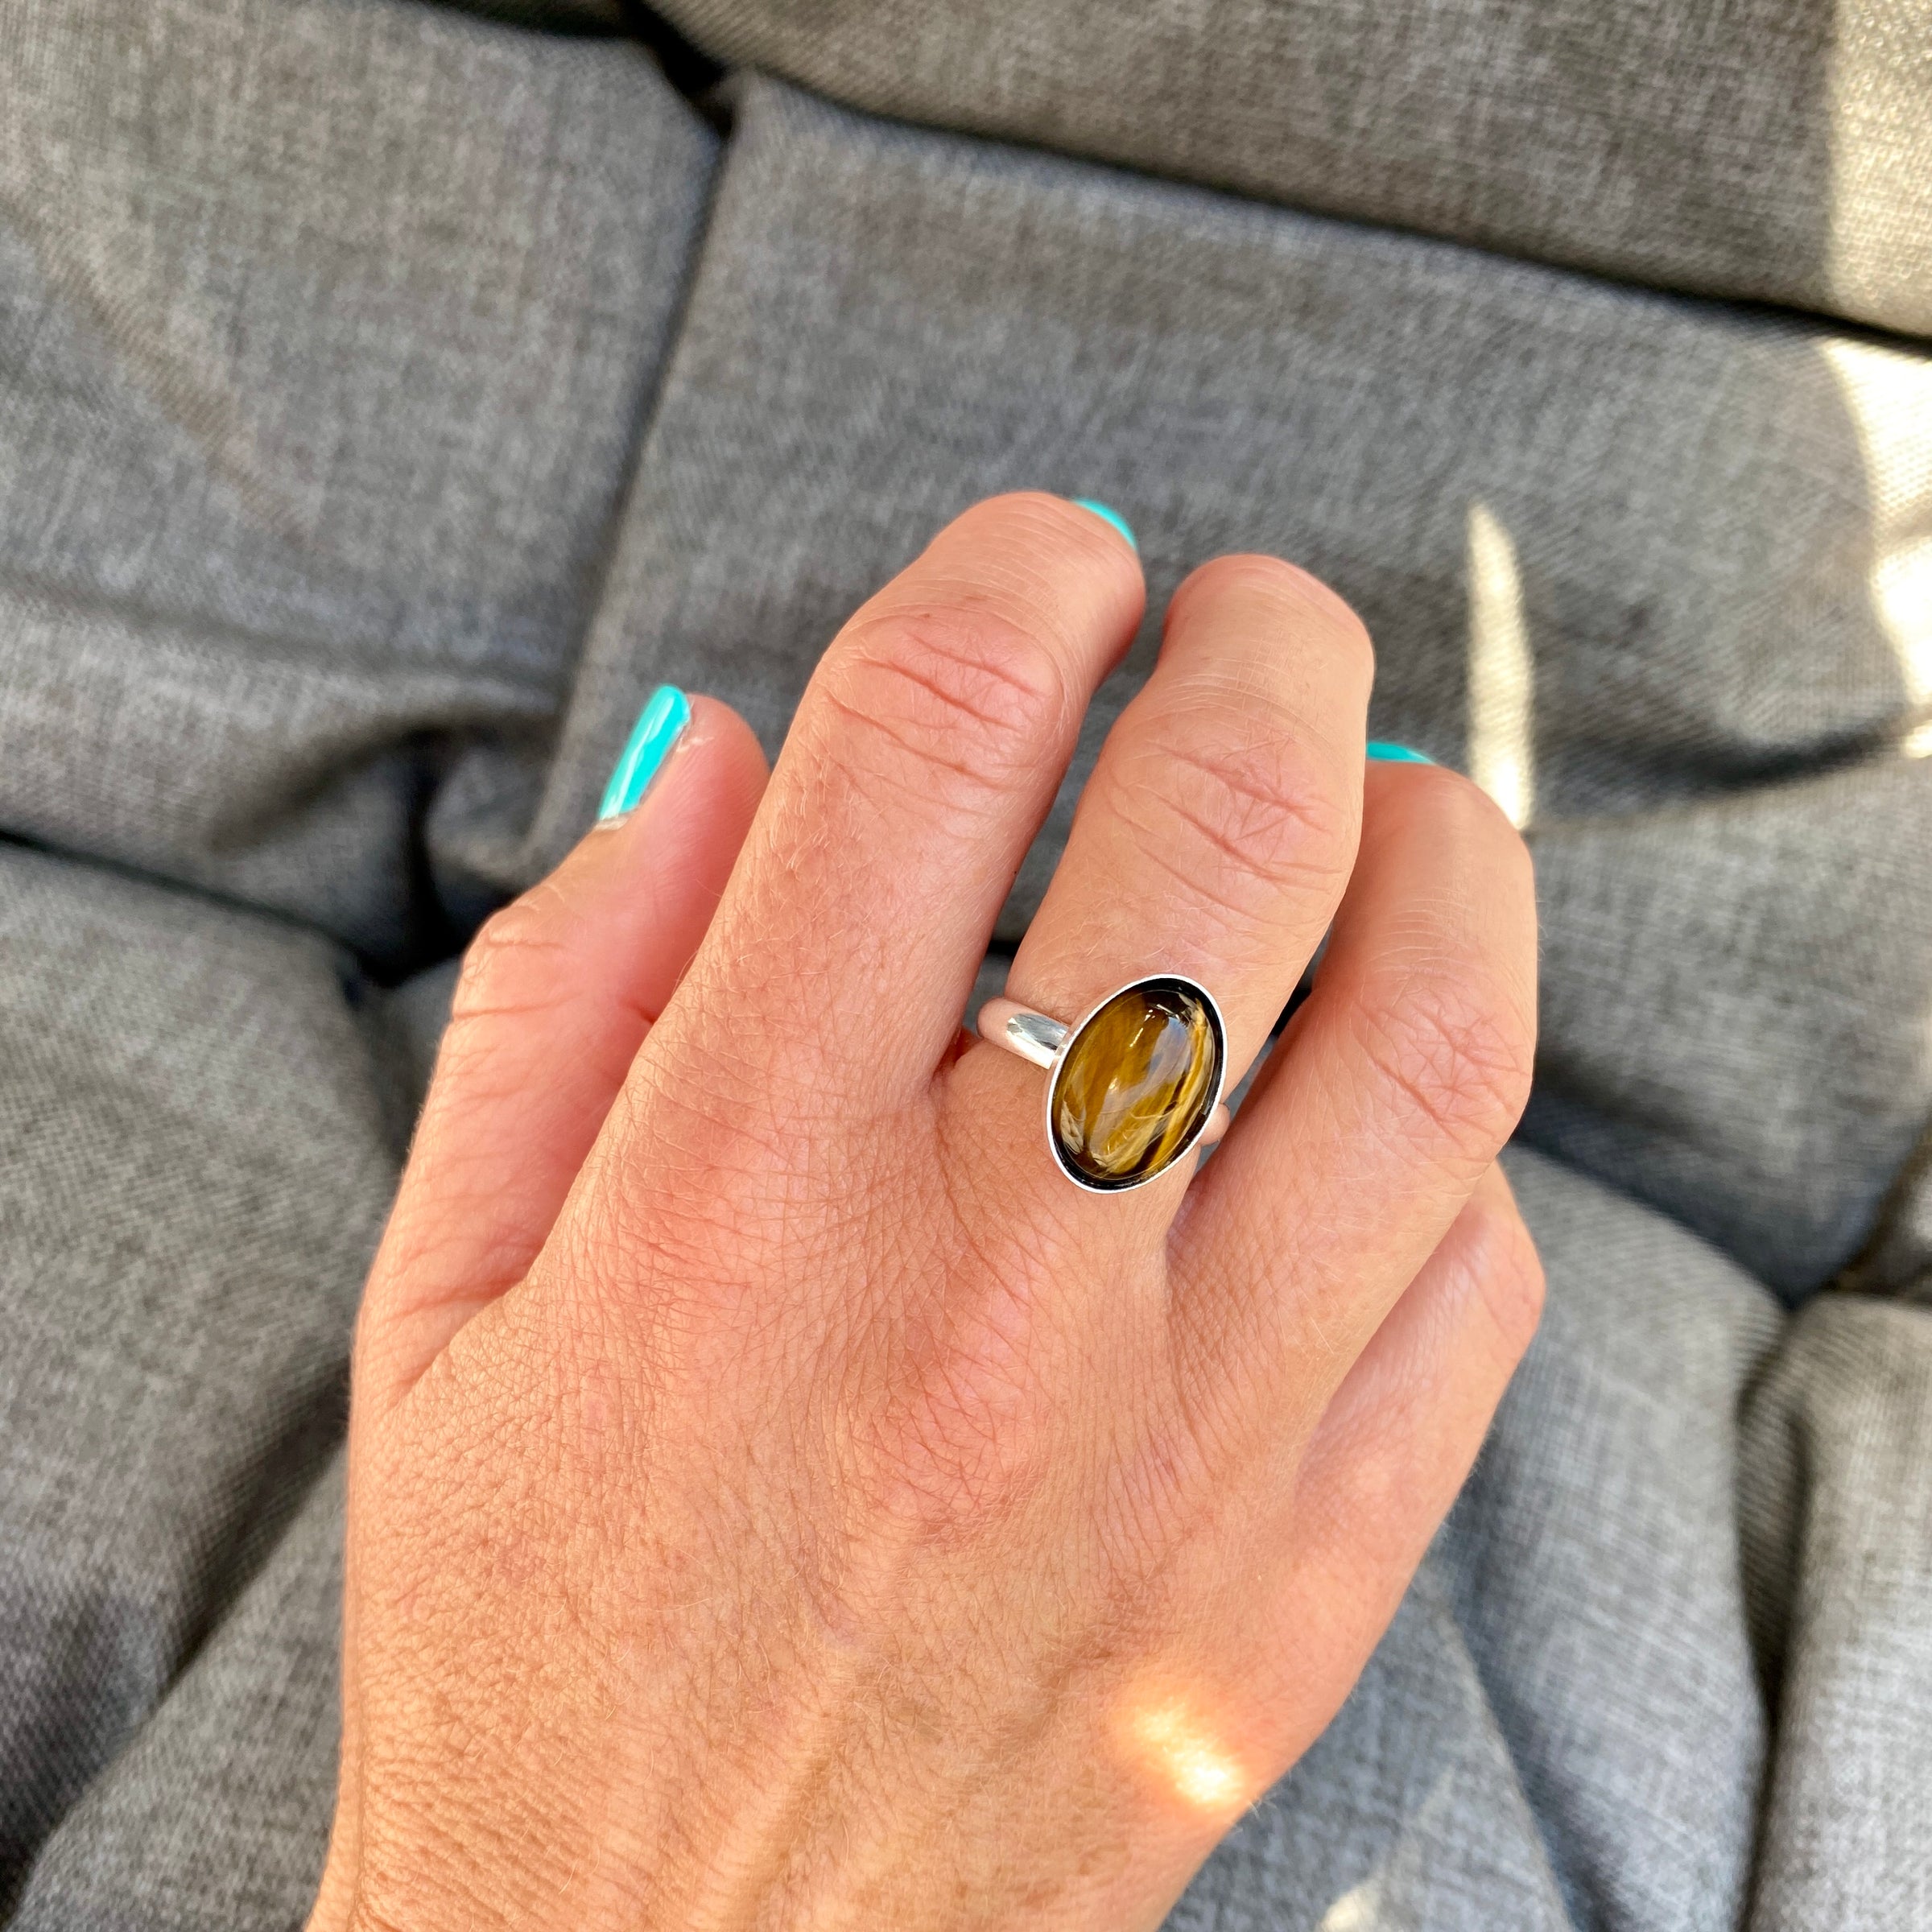 Tiger's Eye Stone Silver Ring Men, Agate Stone Ring, Brown Ring, Unique Ring,  Handmade Ring, Mens Jewelry Gift, Aqeeq Ring, Gift Hor Him - Etsy | Rings  for men, Silver ring designs,